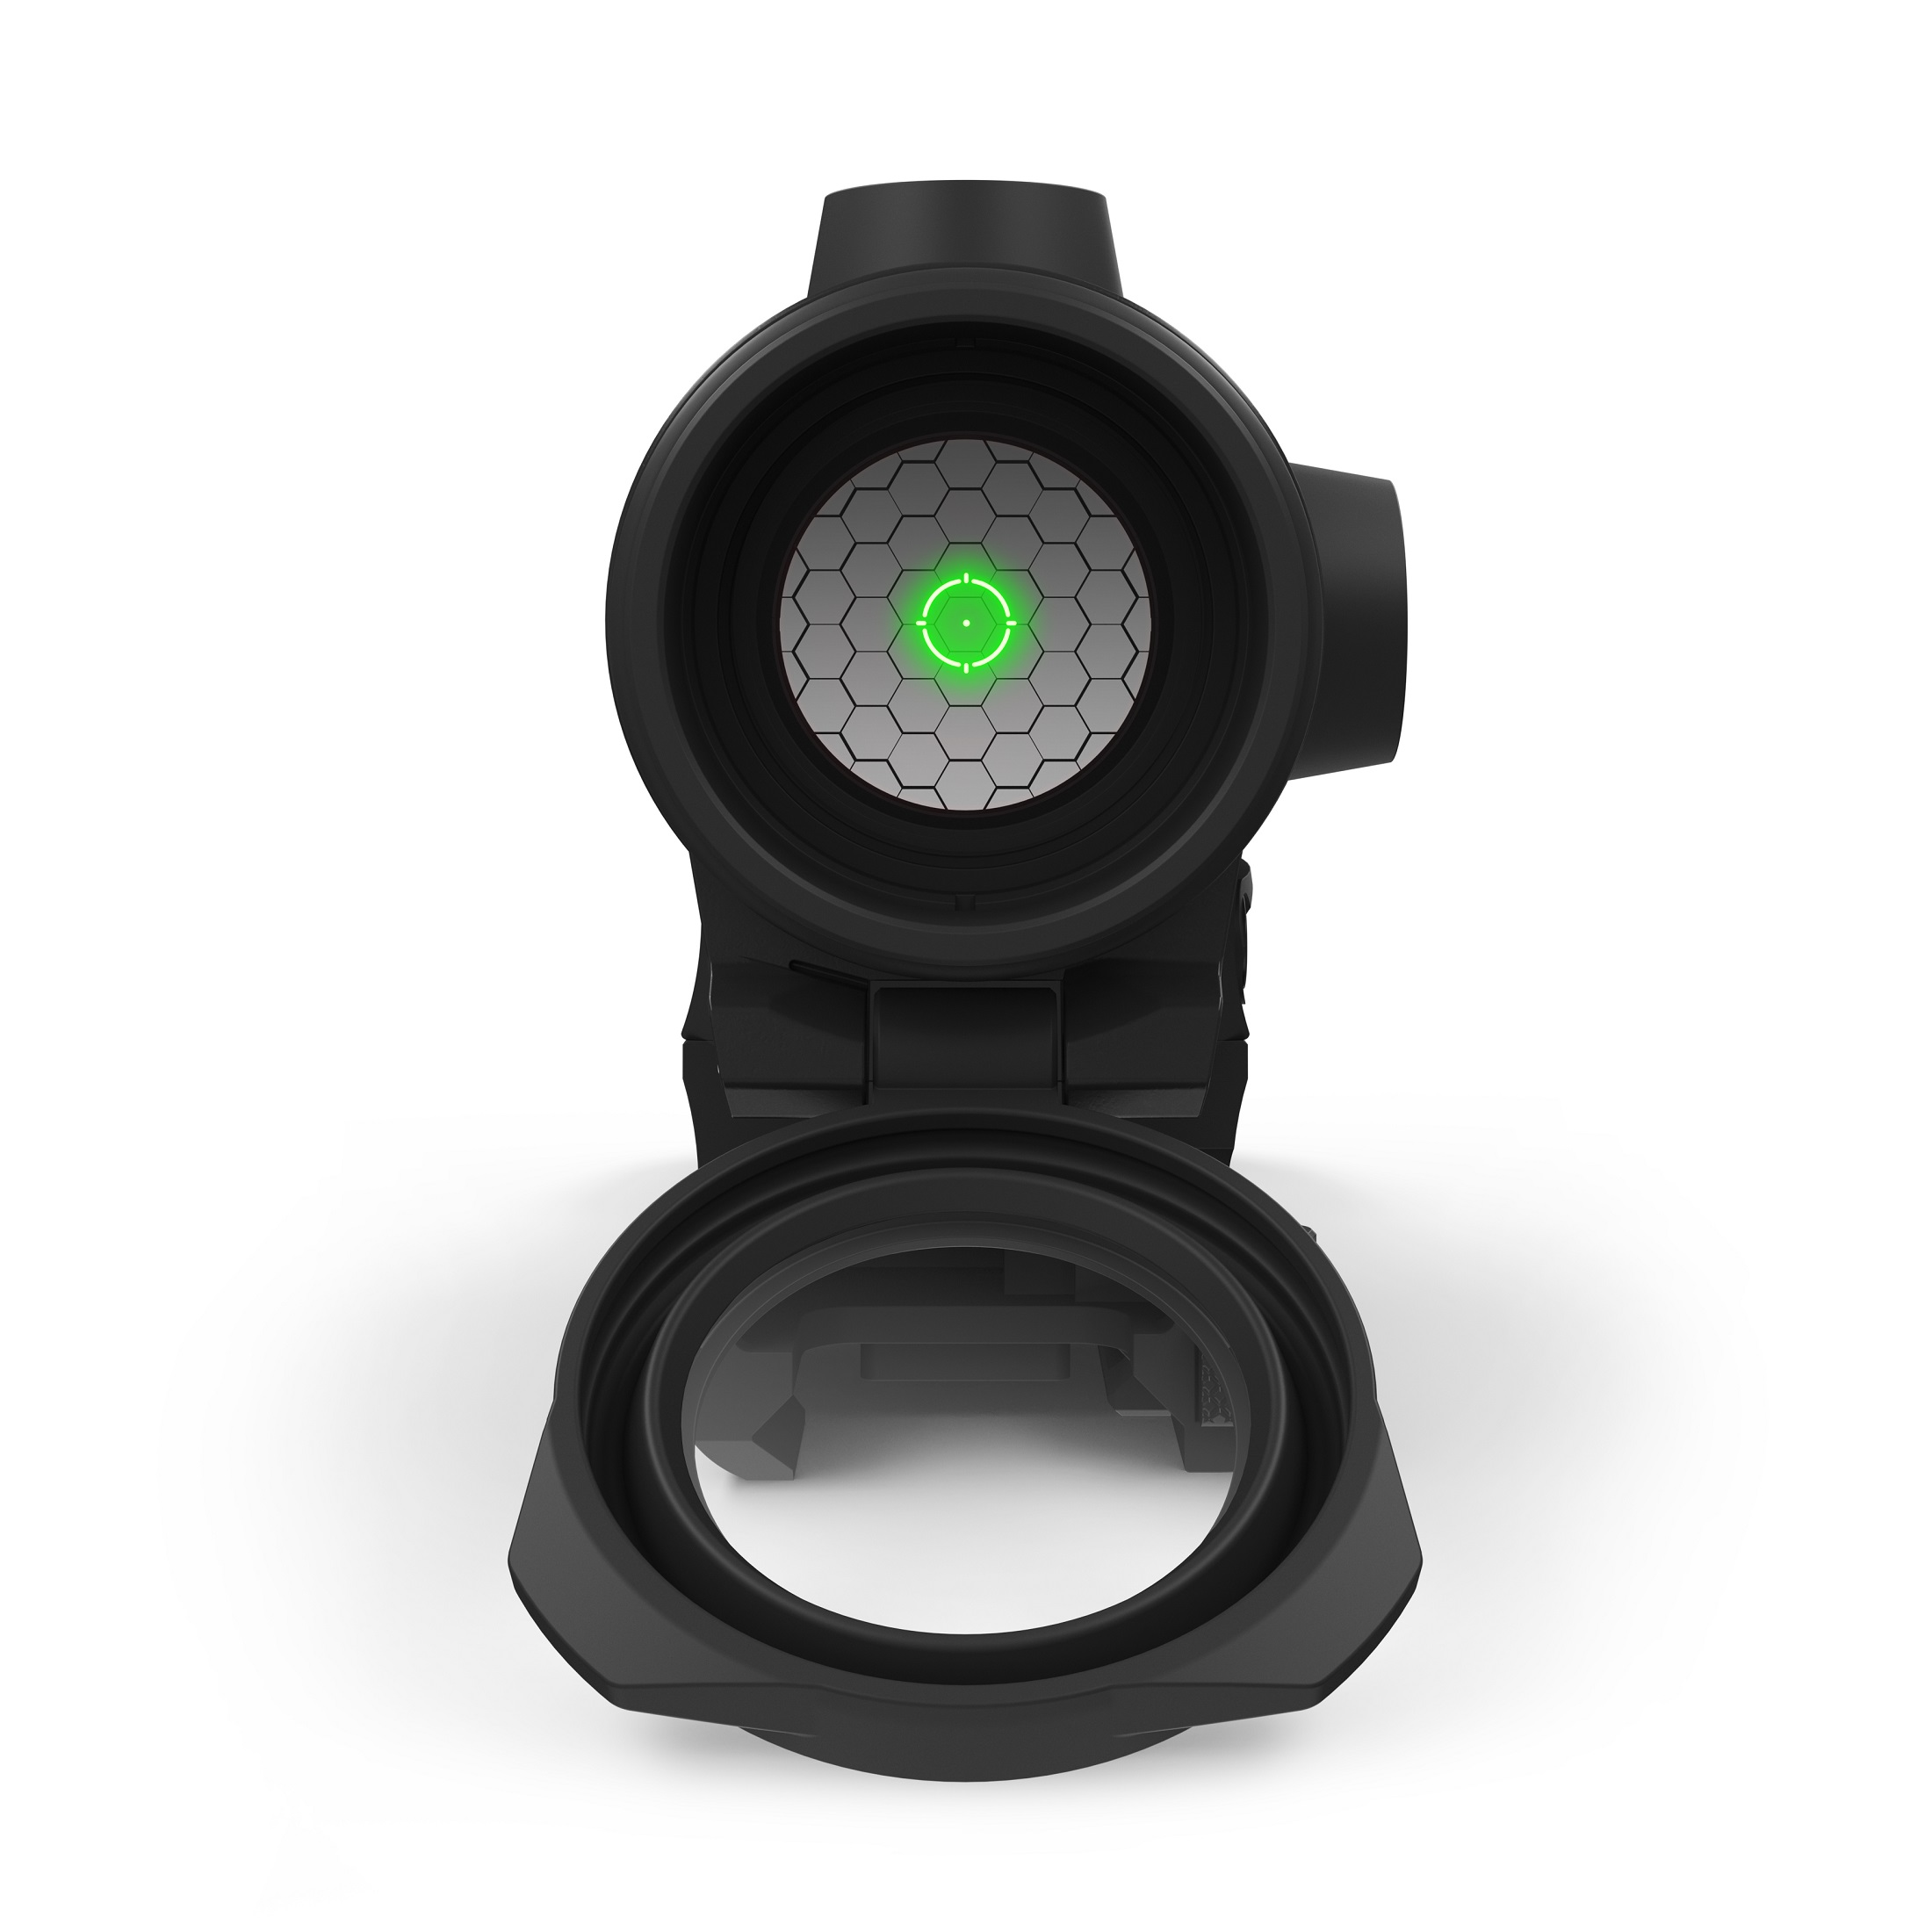 Holosun Green Dot Sight HE530G-GR switchable between Circle Dot and Single Dot and a full titanium …